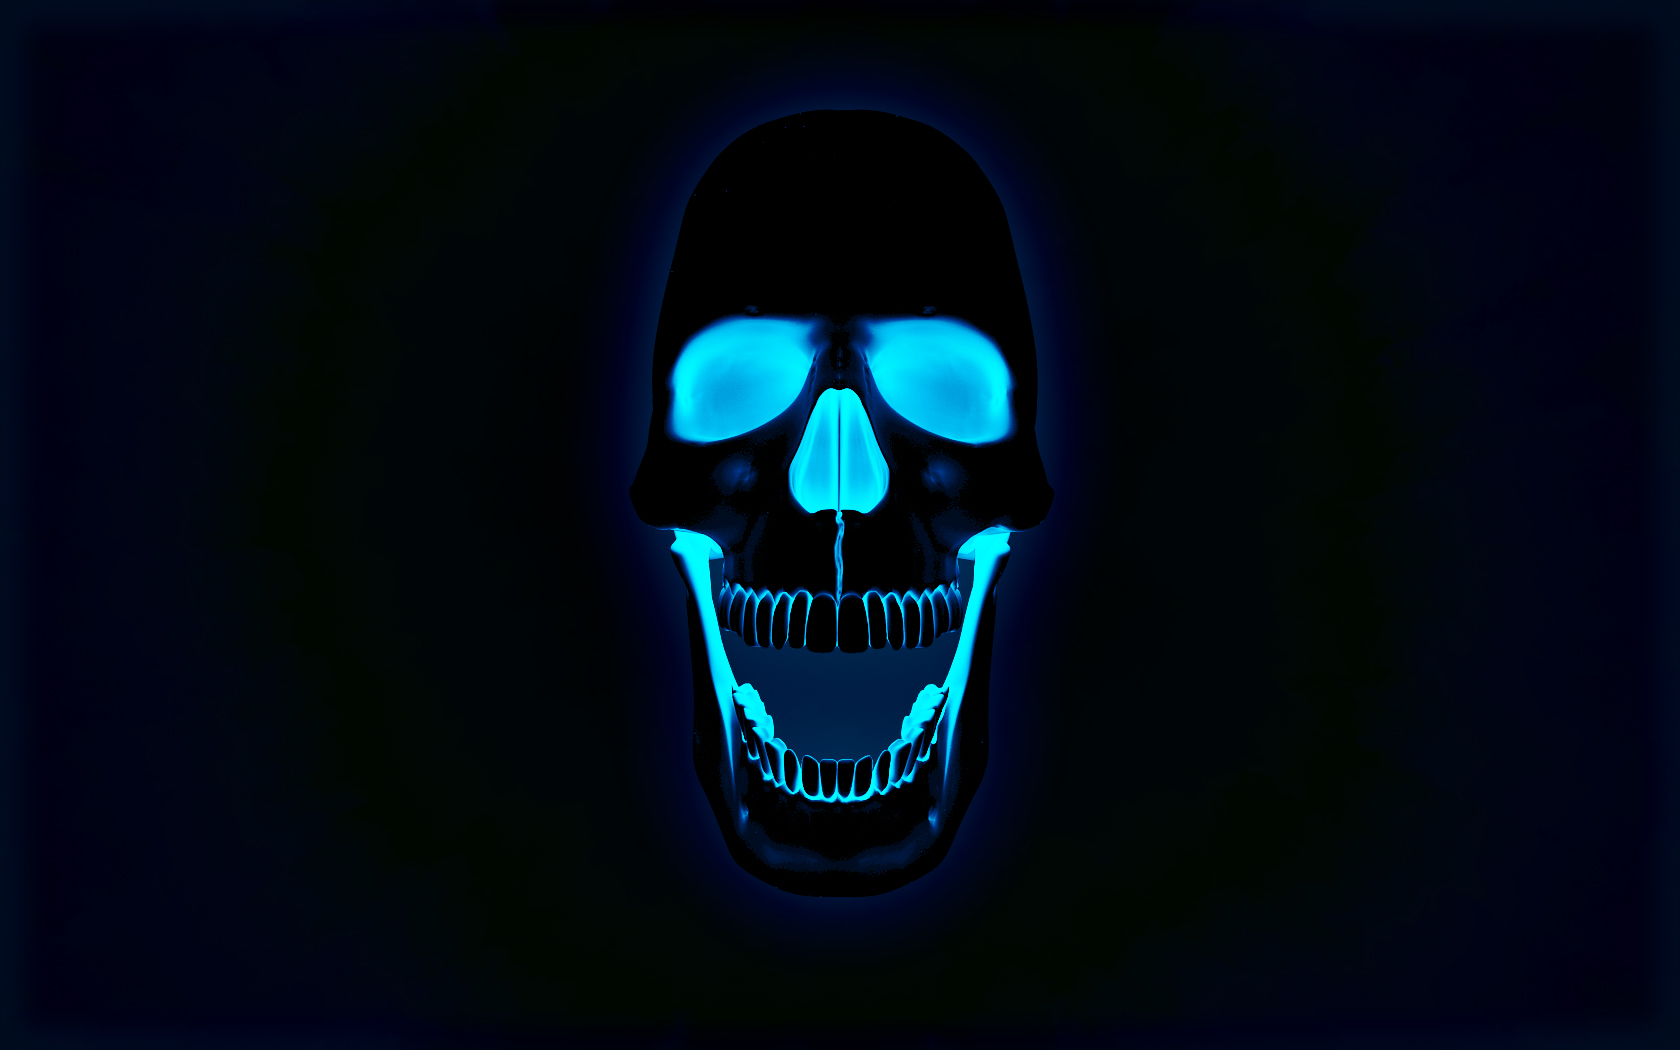 78 high definition skull wallpapers on wallpapersafari 78 high definition skull wallpapers